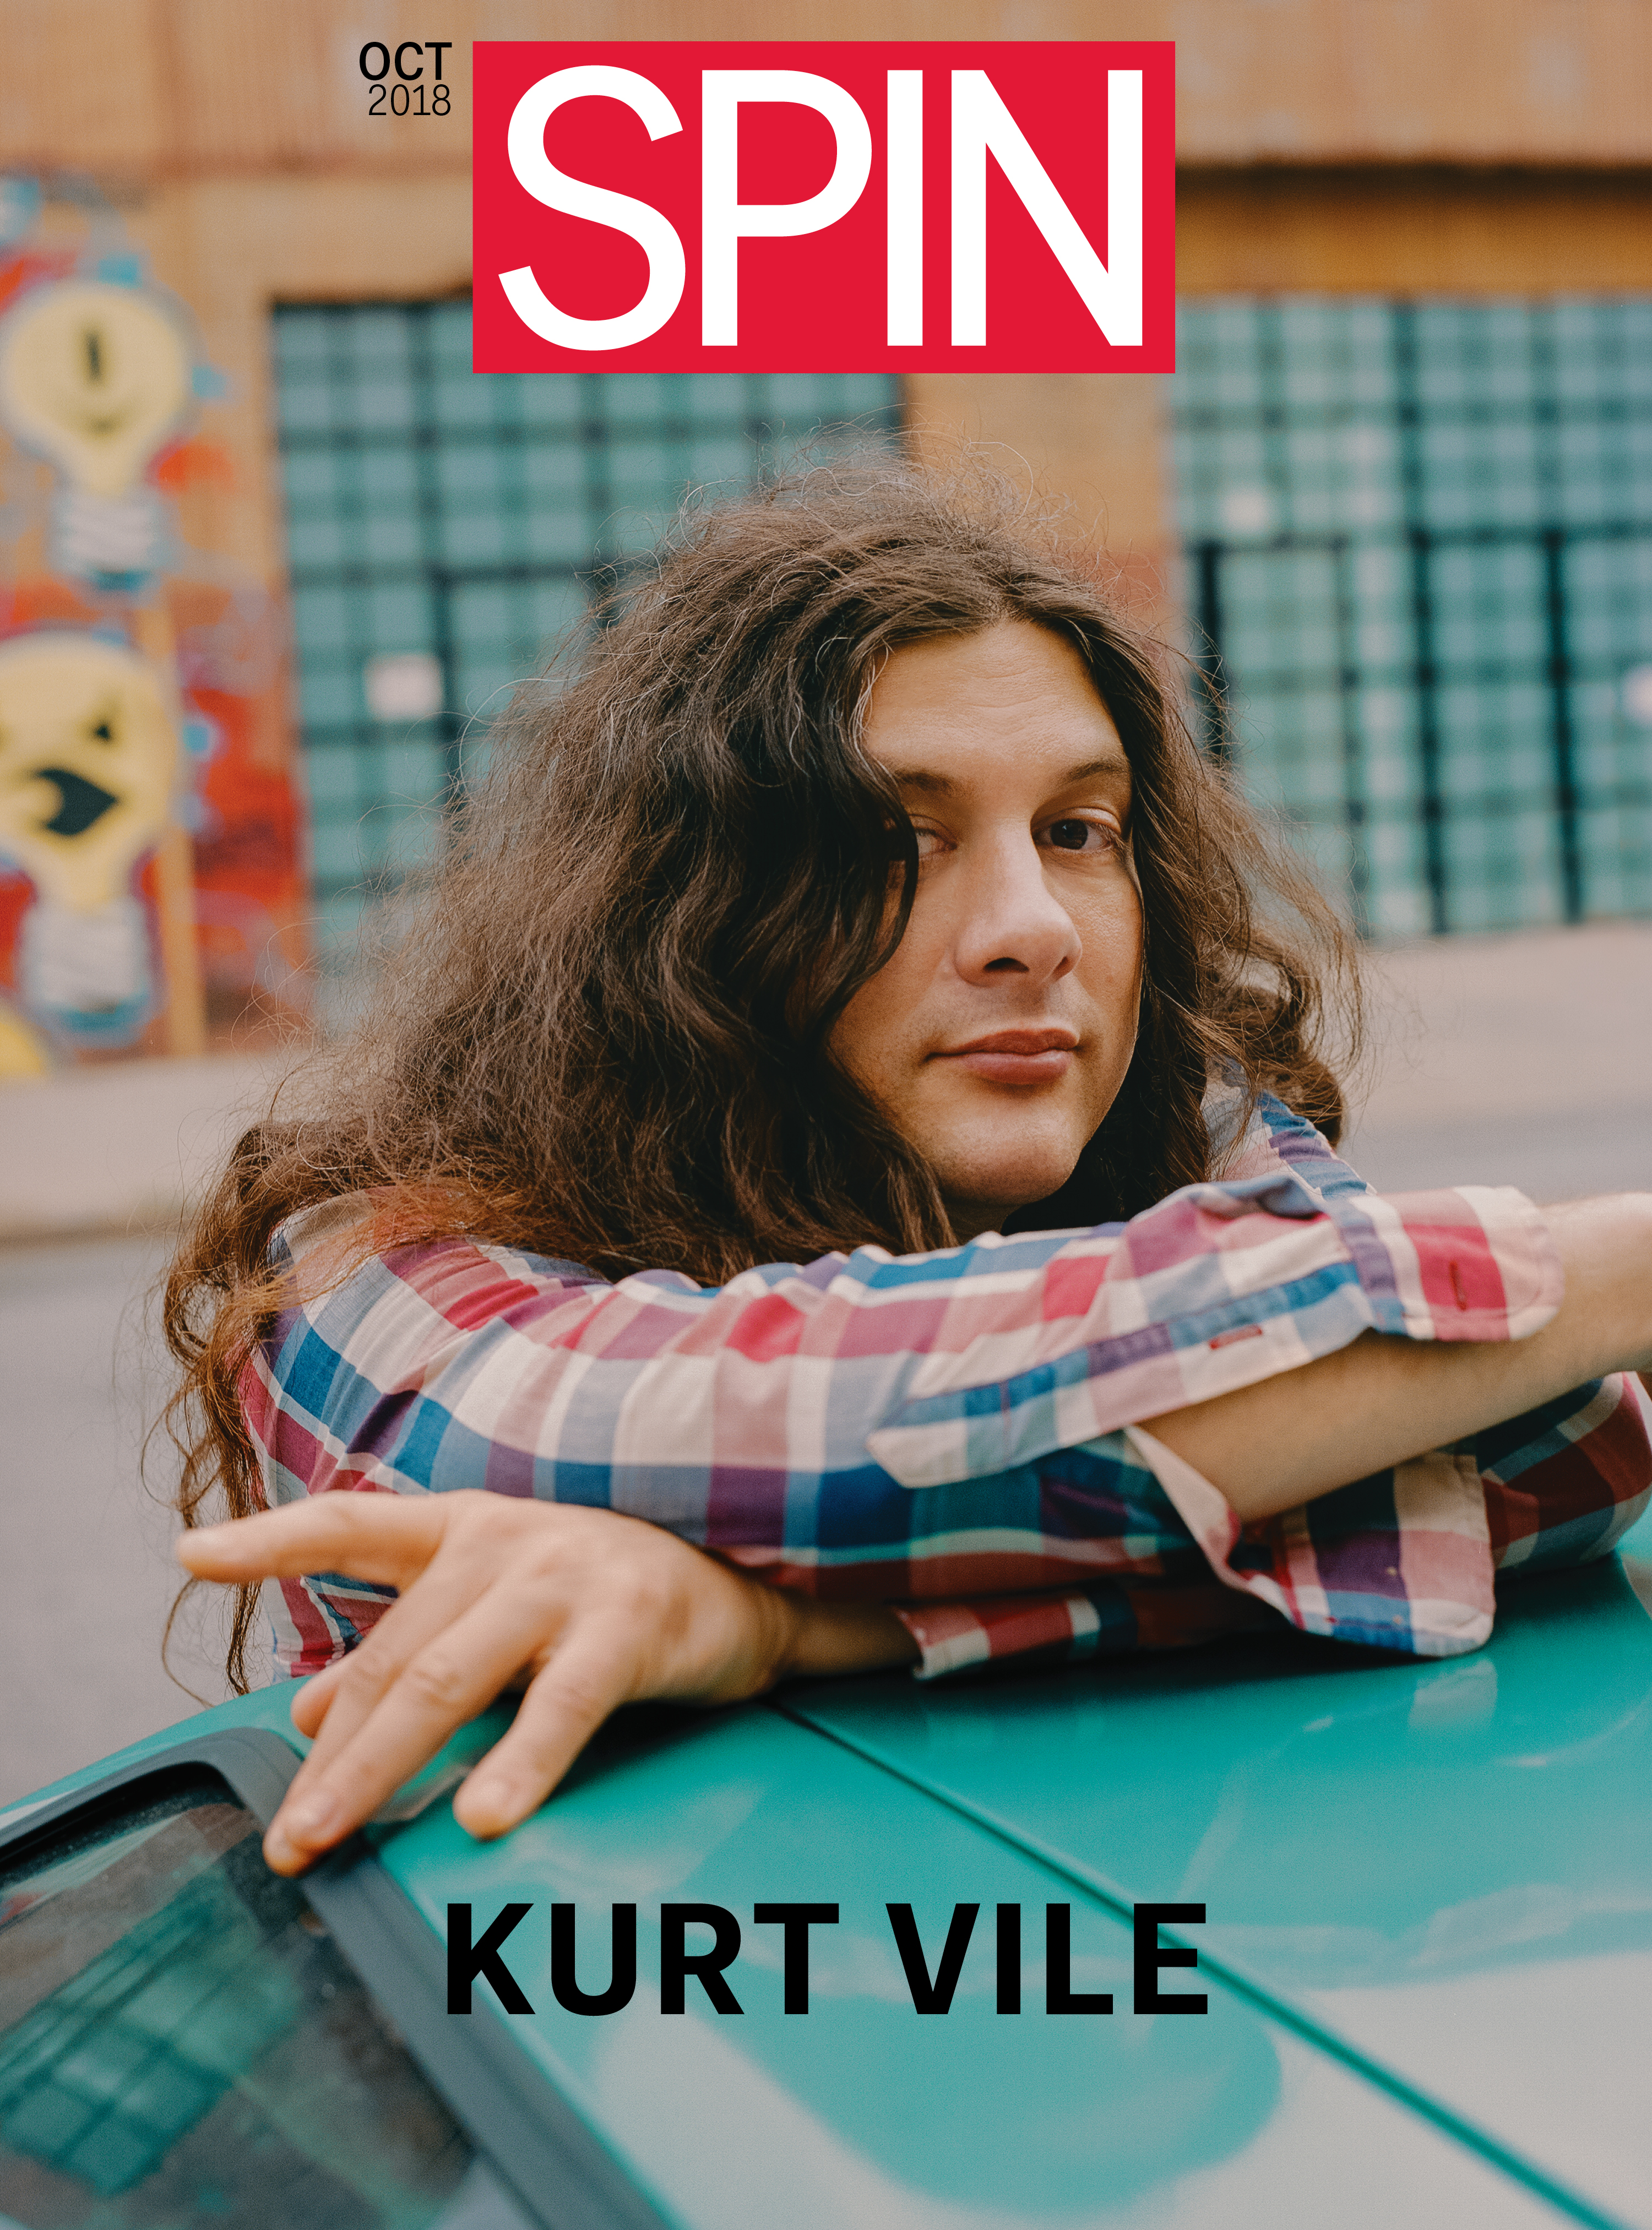 kurt vile spin cover bottle it in interview 2018